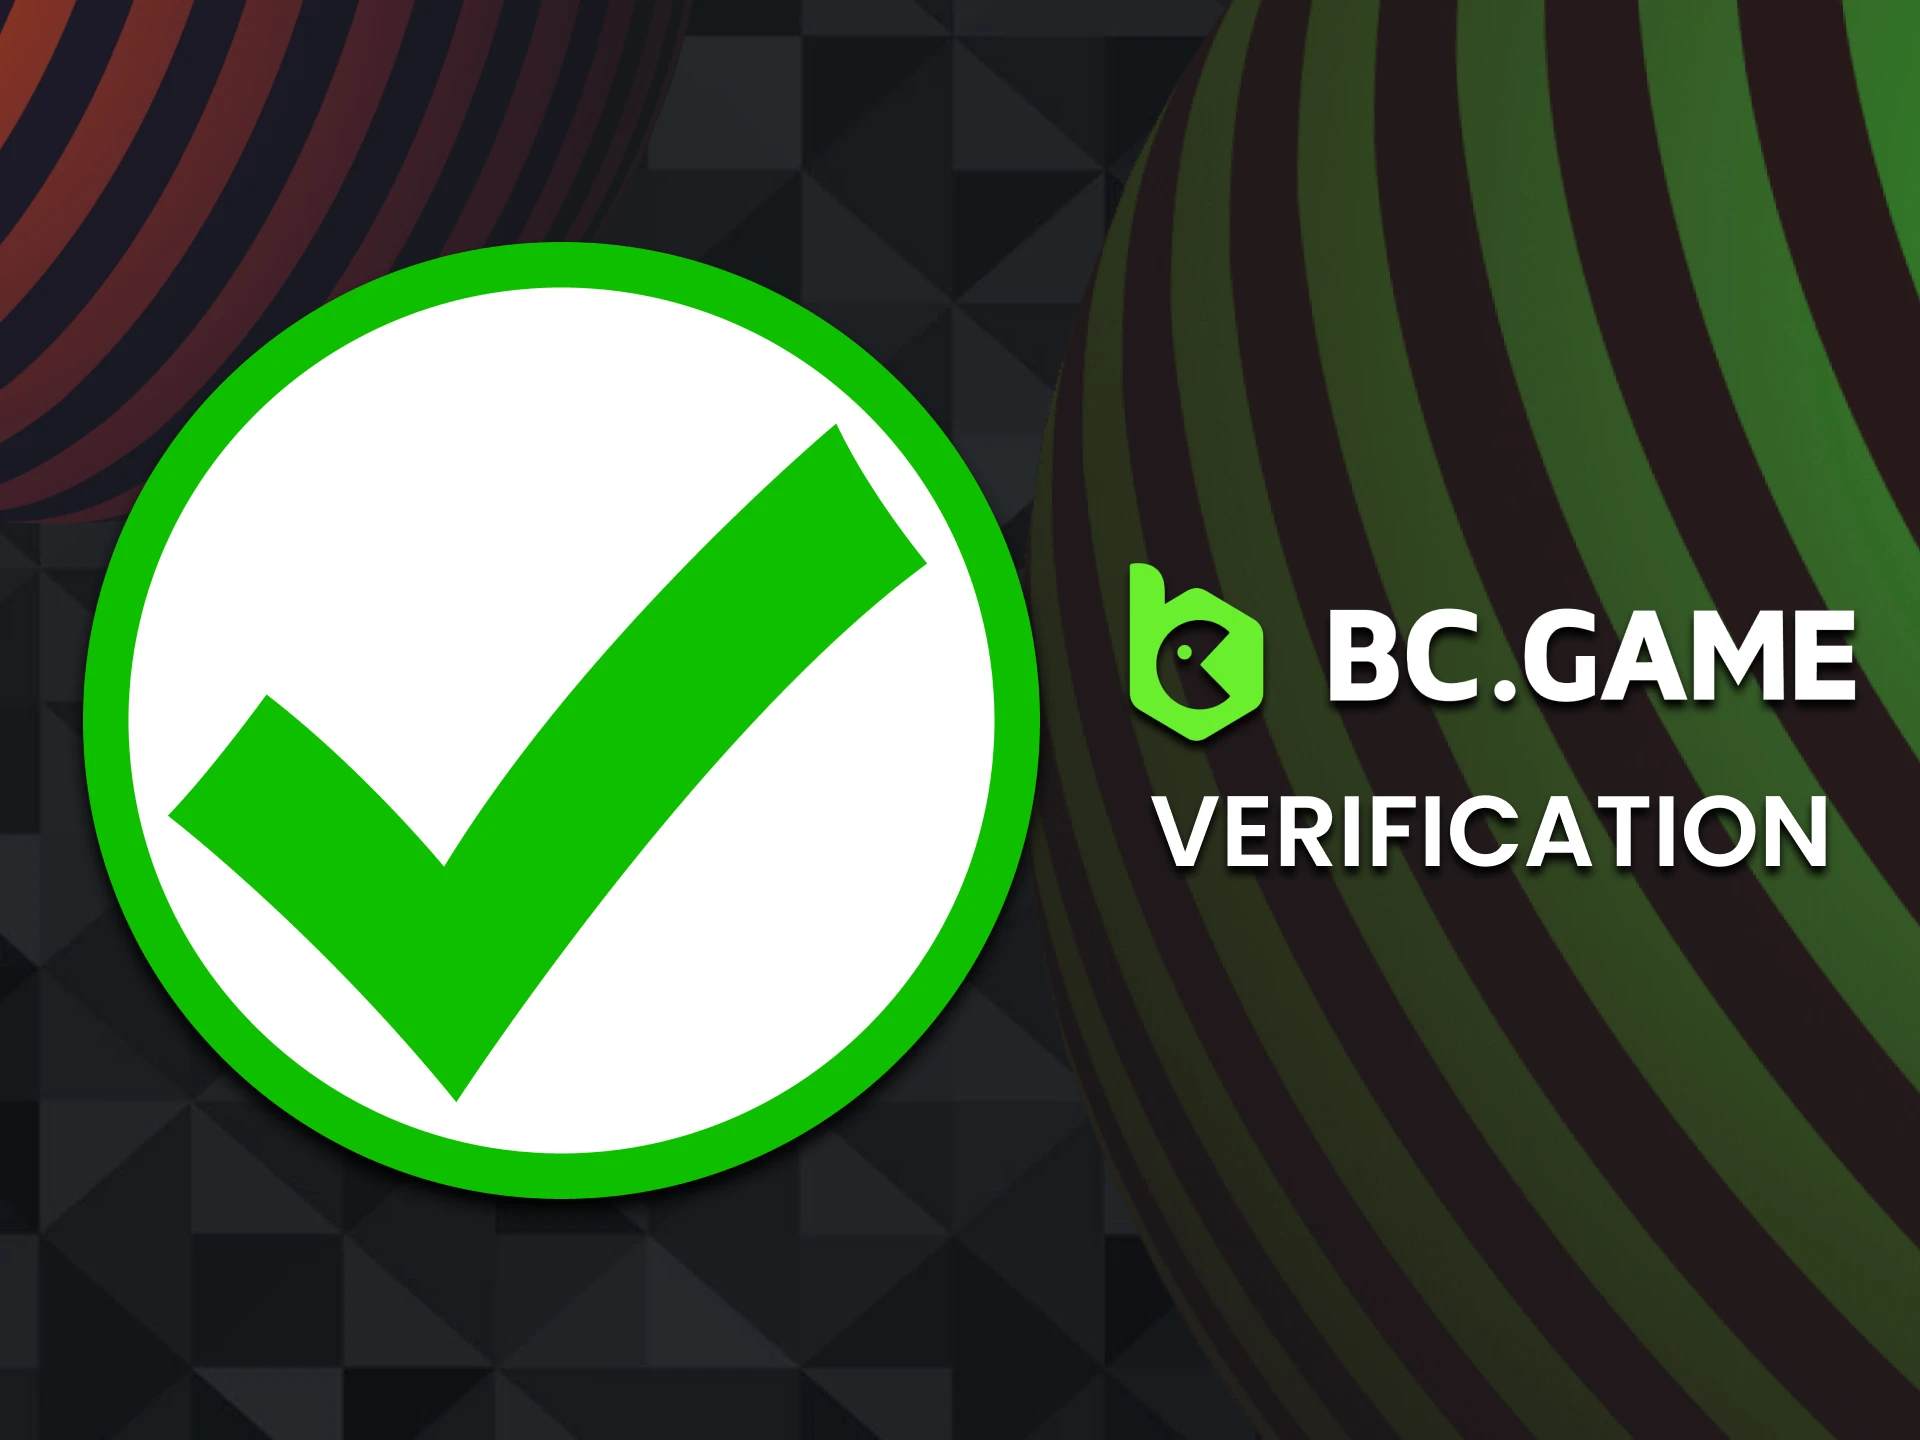 Verify your account at BC Game for full use.